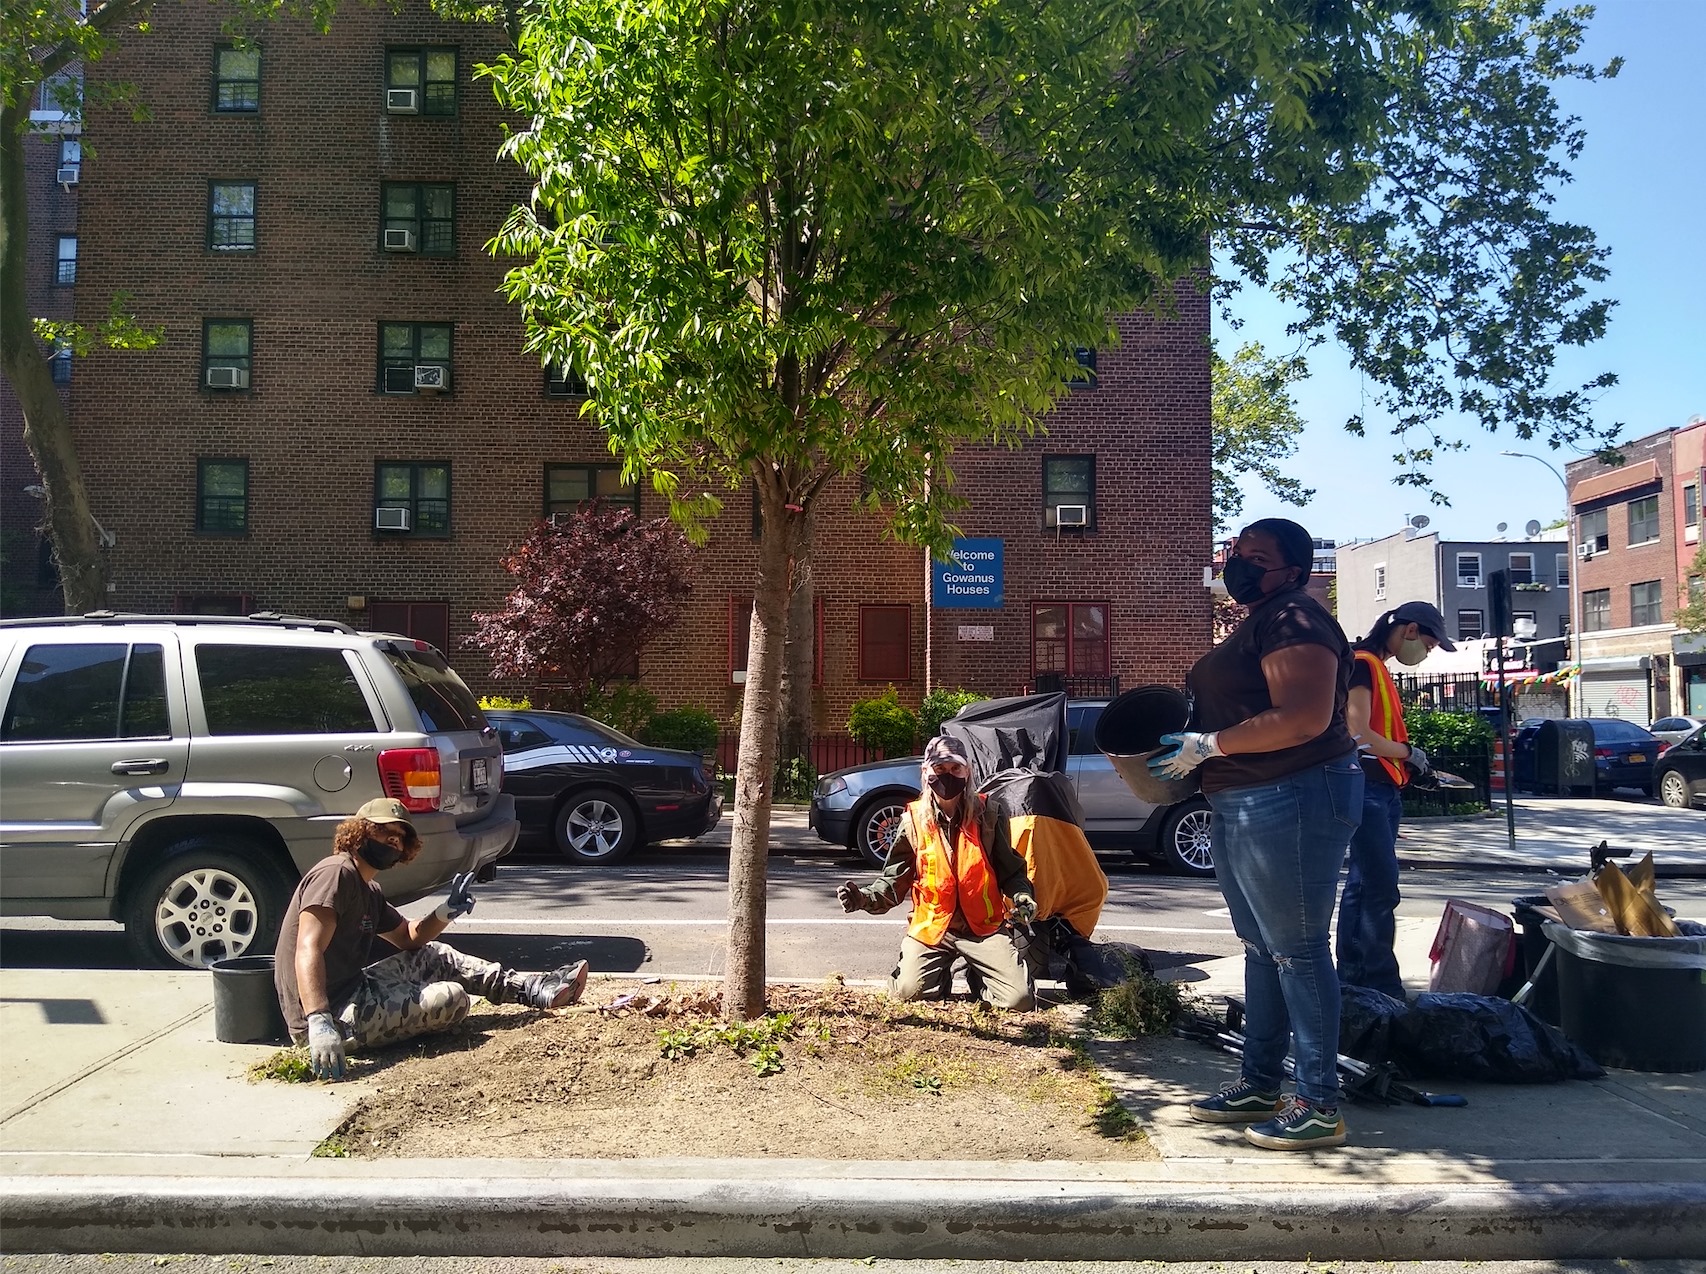 Several people gathered around a tree, caring for it, in the middle of an urban setting.